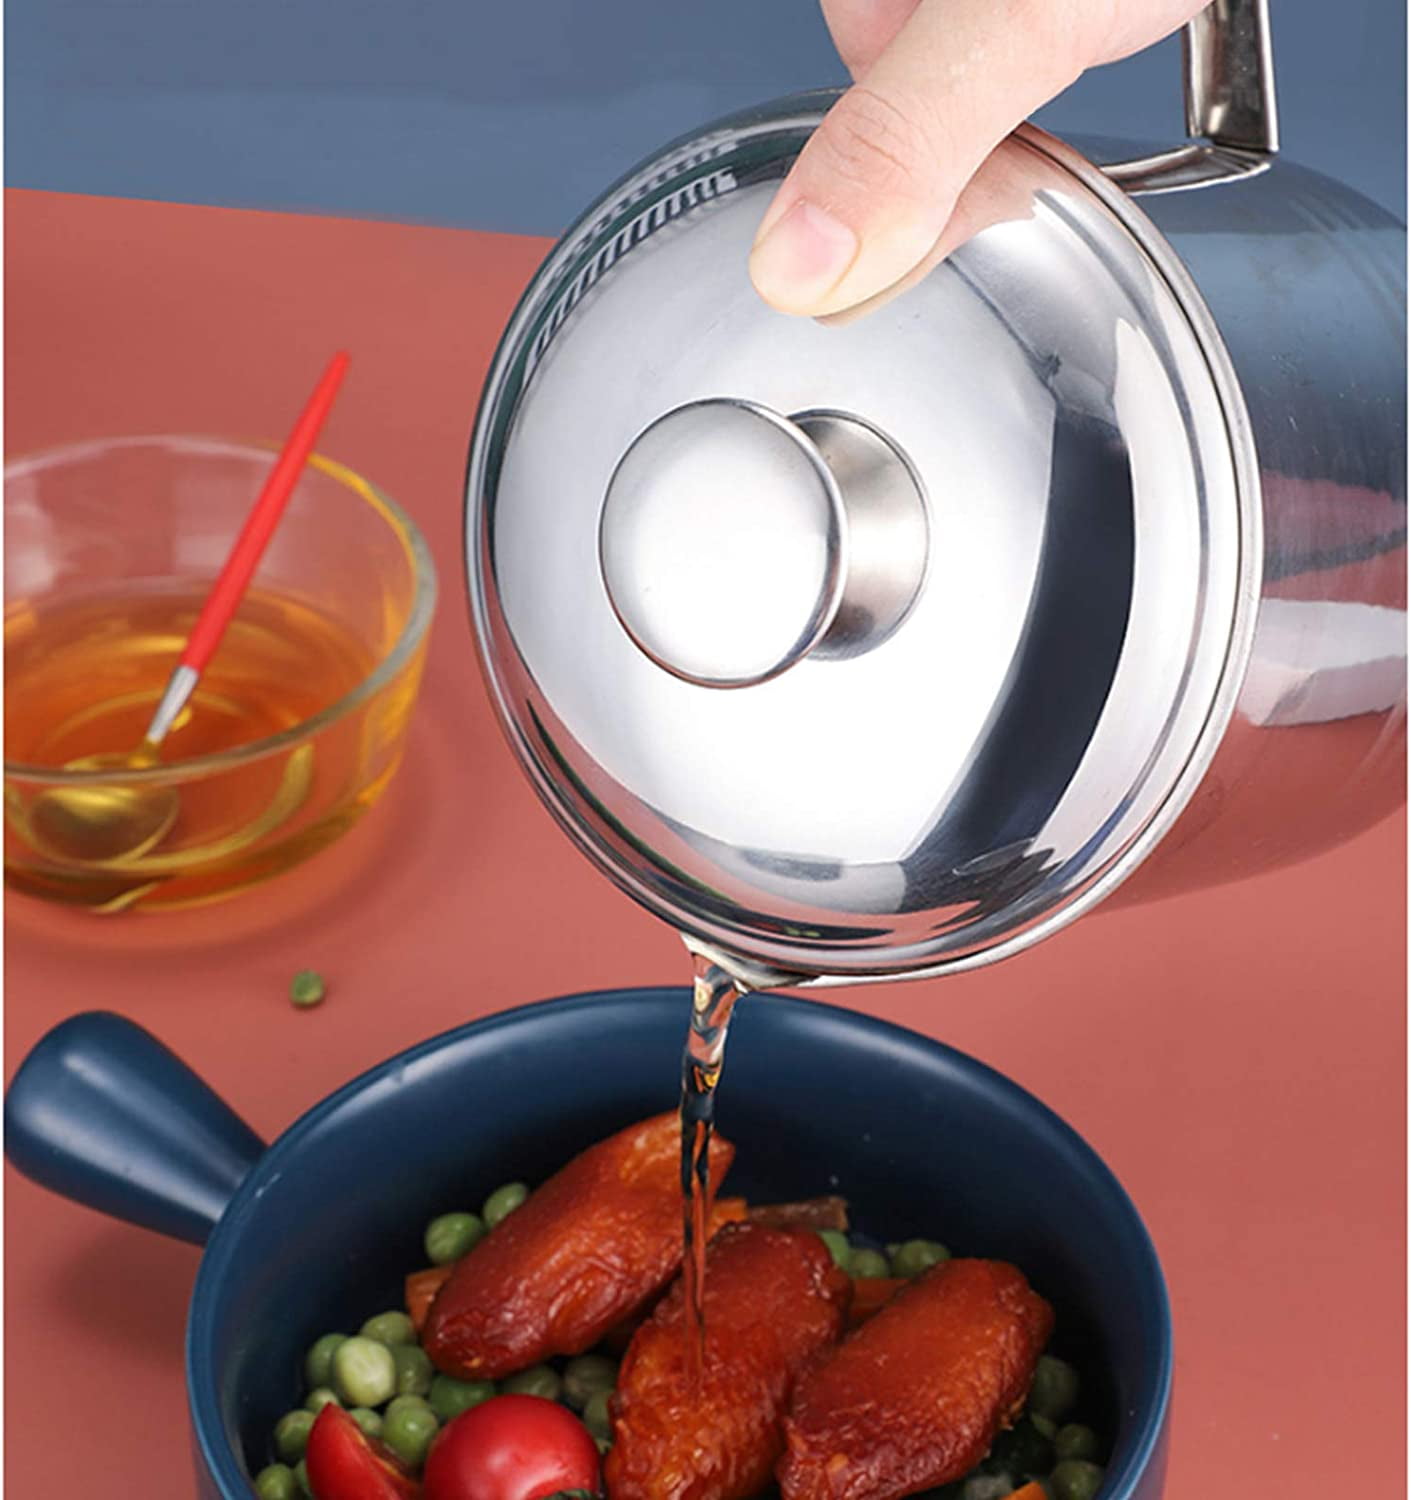 Bacon Grease Container Kitchen Oil Container Can with Strainer for